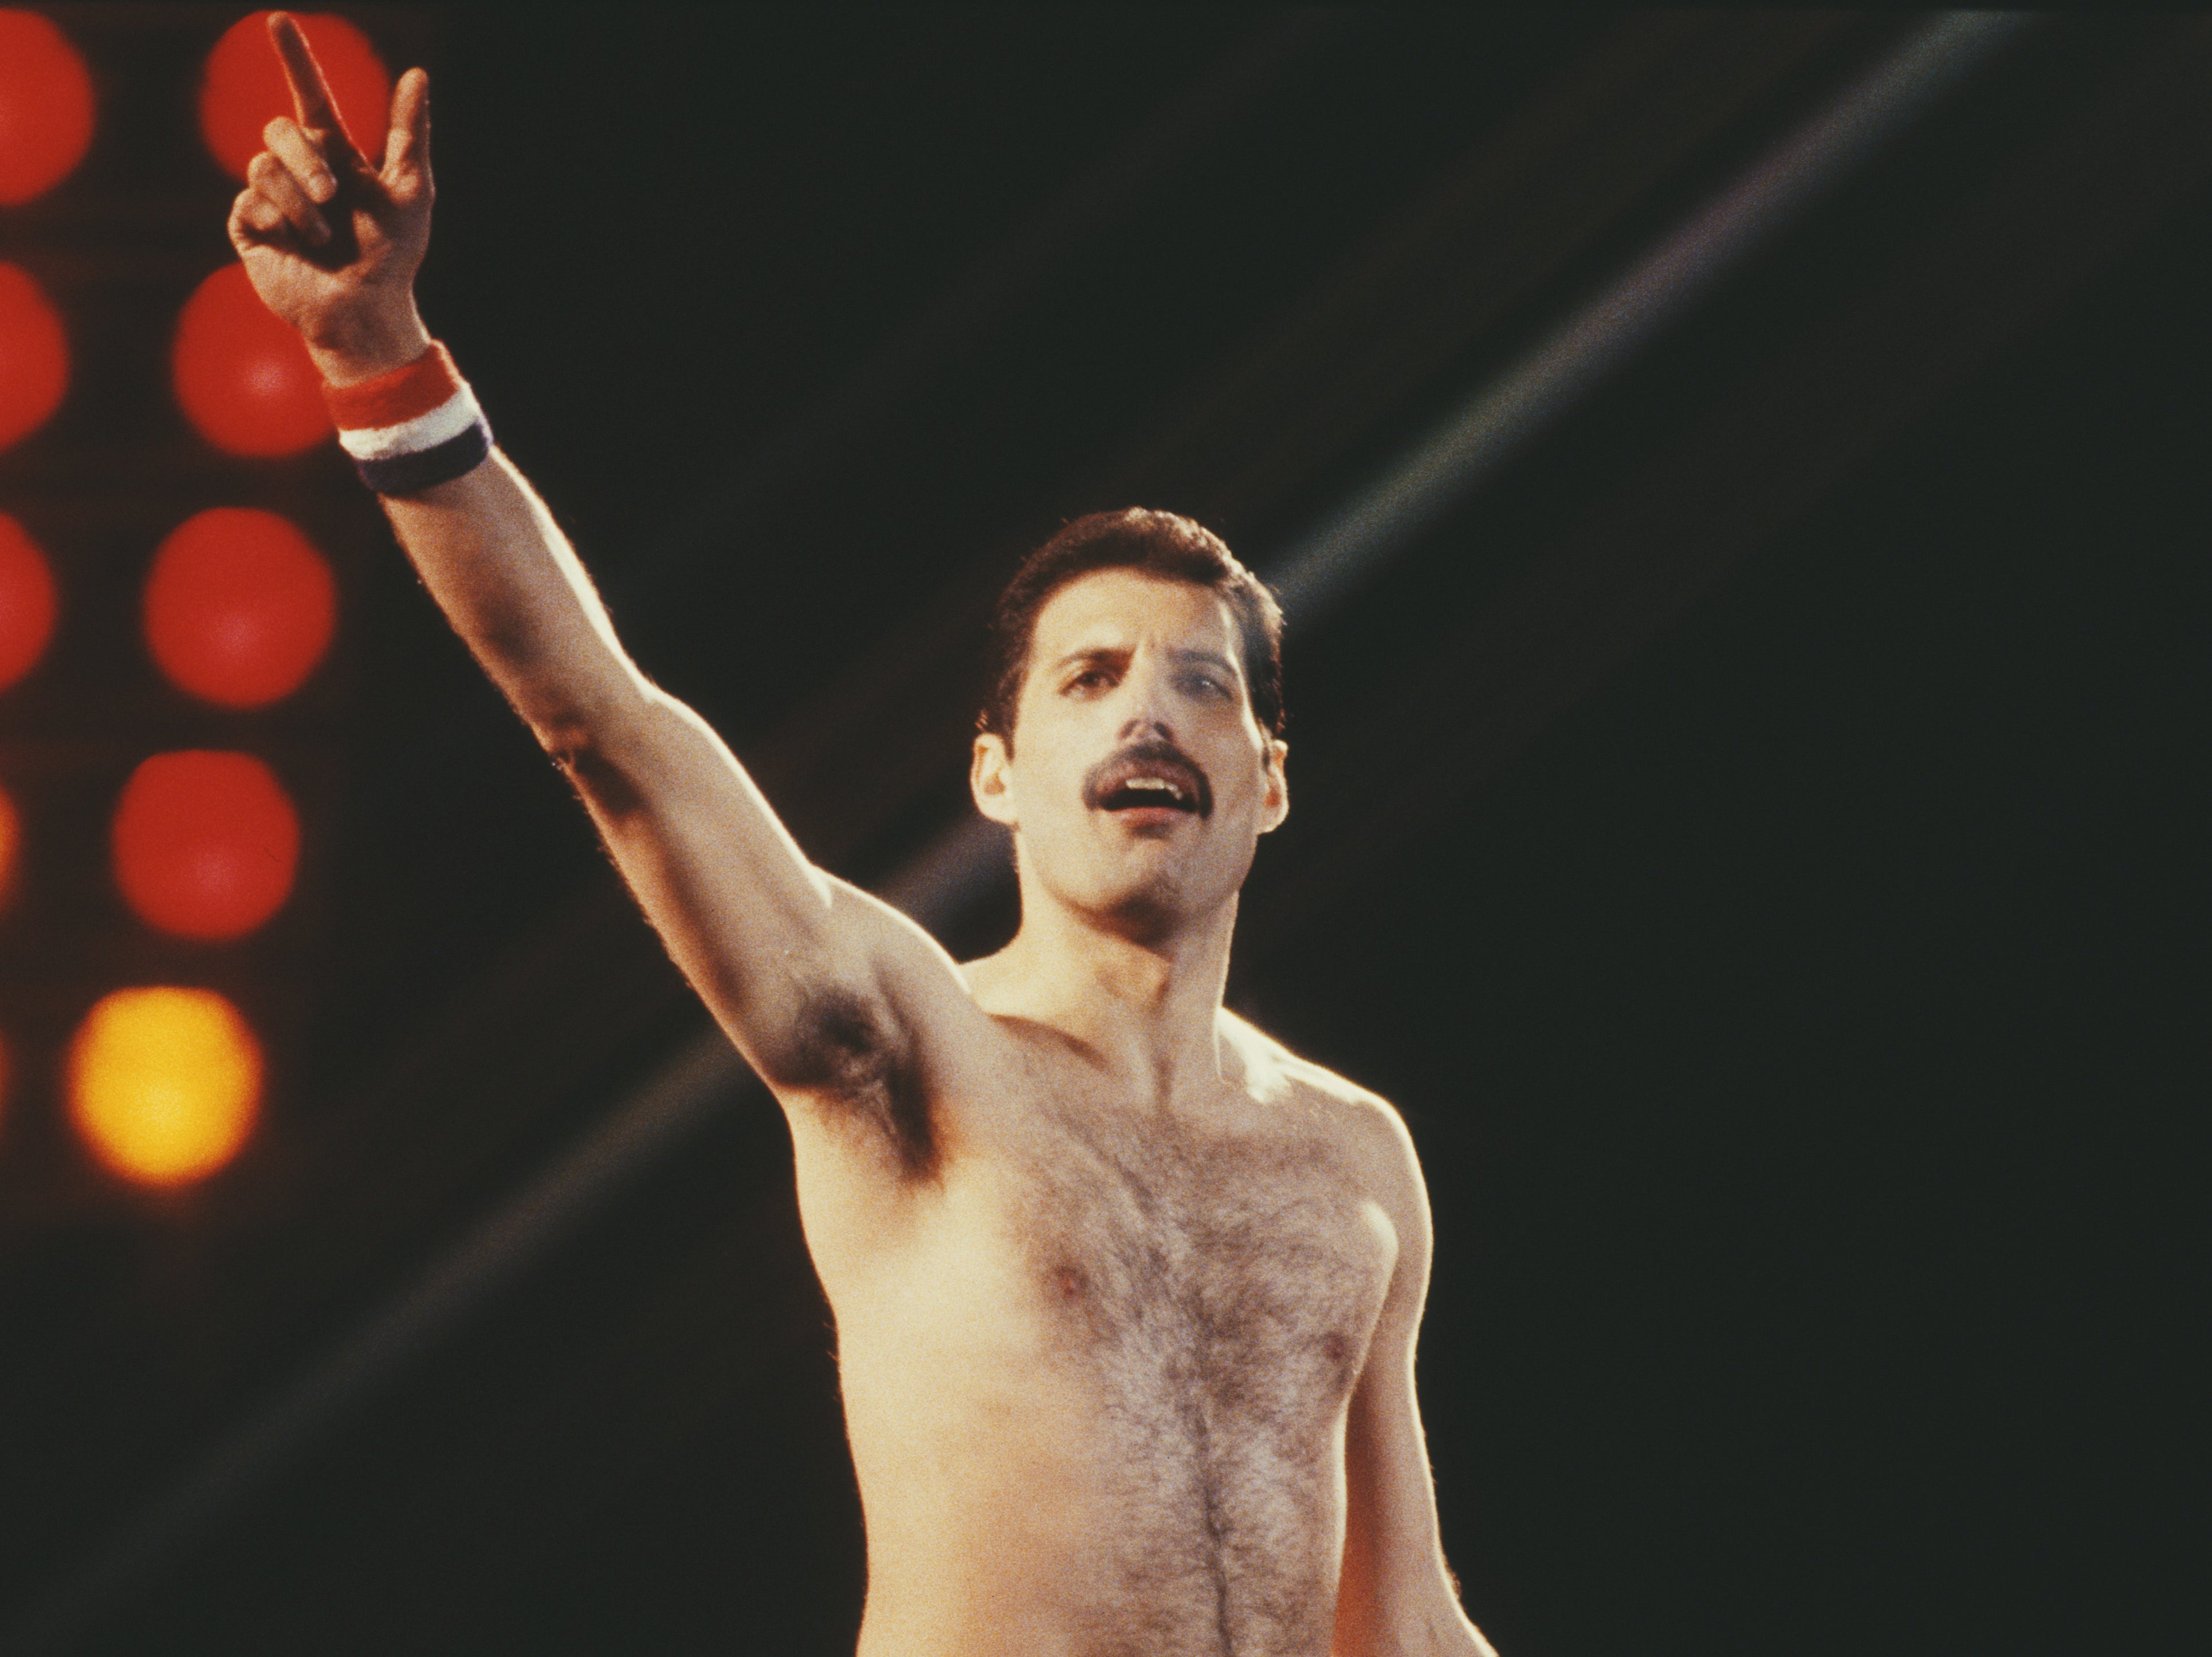 Music fans listening to Queen have been confused by ‘Seven Seas of Rhye’